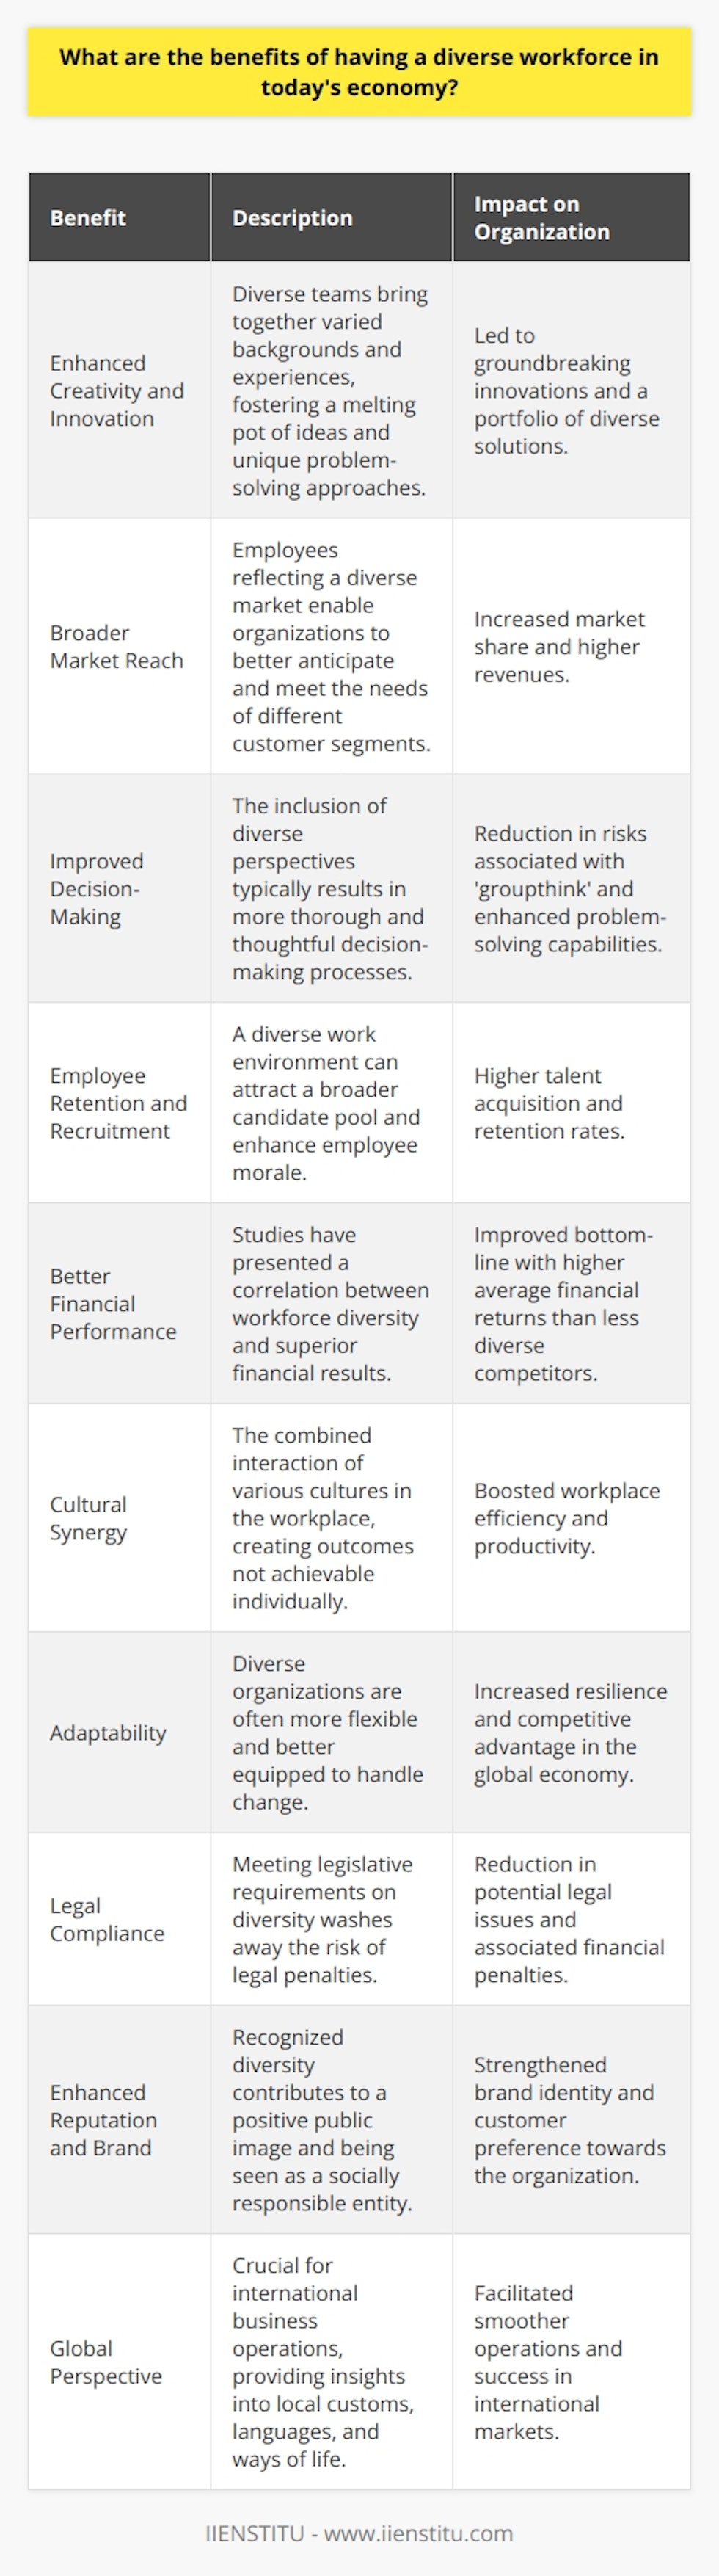 In today's economy, a diverse workforce isn't just a buzzword; it's a strategic asset that can catalyze growth, foster innovation, and drive market competitiveness. Here's how a diverse blend of employees benefits an organization:**Enhanced Creativity and Innovation**The amalgamation of varied backgrounds and experiences in a diverse team leads to a melting pot of ideas. People with different life experiences and cultural perspectives often tackle problems uniquely, resulting in a broader range of solutions. This can lead to unexpected and groundbreaking innovations that propel businesses forward.**Broader Market Reach**A diverse workforce mirrors a diverse market, enabling companies to empathize and understand an array of customers and clients. This understanding is crucial for developing products and marketing strategies that appeal to different segments of society, leading to increased market share and revenues.**Improved Decision-Making**Diverse groups tend to consider a wider range of perspectives before arriving at a decision. This thoroughness leads to more effective problem-solving as it reduces the risks associated with 'groupthink,' where the desire for harmony or conformity results in irrational or dysfunctional decision-making.**Increases employee retention and recruitment**A commitment to diversity can enhance a company’s brand. Being known as a business that values all employees can help attract a wider pool of candidates, as job seekers are increasingly looking for workplaces that embrace diversity. A diverse work environment can improve employee morale and ensure that the best talent stays within the organization.**Better Financial Performance**Studies have consistently shown that companies with higher diversity levels obtain better financial results on average than those with less diversity in their workforce. This correlation between diversity and financial performance underlines the tangible benefits of cultivating a varied employee base.**Cultural Synergy**Cultural diversity in the workplace can also lead to a phenomenon known as cultural synergy, where the collaborative interaction of various cultures results in outcomes that might not be achieved by any one cultural group alone. Cultural synergy can be a boon for workplace efficiency and productivity.**Adaptability**Organizations with a diverse workforce are generally more adaptable to changes. This agility is crucial in a constantly shifting global economy. The varying approaches to change and differing strategies for coping with new challenges can help businesses stay resilient.**Legal Compliance**Many countries have laws that require certain levels of workplace diversity. By embracing diversity, organizations can ensure they are in compliance with these regulations, avoiding legal issues and potential financial penalties.**Enhanced Reputation and Brand**Companies known for their diversity are also perceived as more responsible and fair. This positive public image can become a part of the brand’s identity, enhancing its reputation not only among potential employees but also consumers who prefer doing business with socially responsible entities.**Global Perspective**Finally, a diverse workforce is essential for companies that operate on a global scale. Understanding local customs, languages, and ways of life is critical for global business success. A culturally diverse workforce can provide these insights, facilitating smoother international operations.To sum up, the economic benefits of a diverse workforce are wide-ranging and fundamental to a thriving organization. It boosts creative problem-solving, empowers a global perspective, and aligns closely with an ethical and socially responsive business model. As the world continues to converge through technology and globalization, diversity in the workplace is not merely an ethical imperative but also a vital component of a robust and dynamic economy.